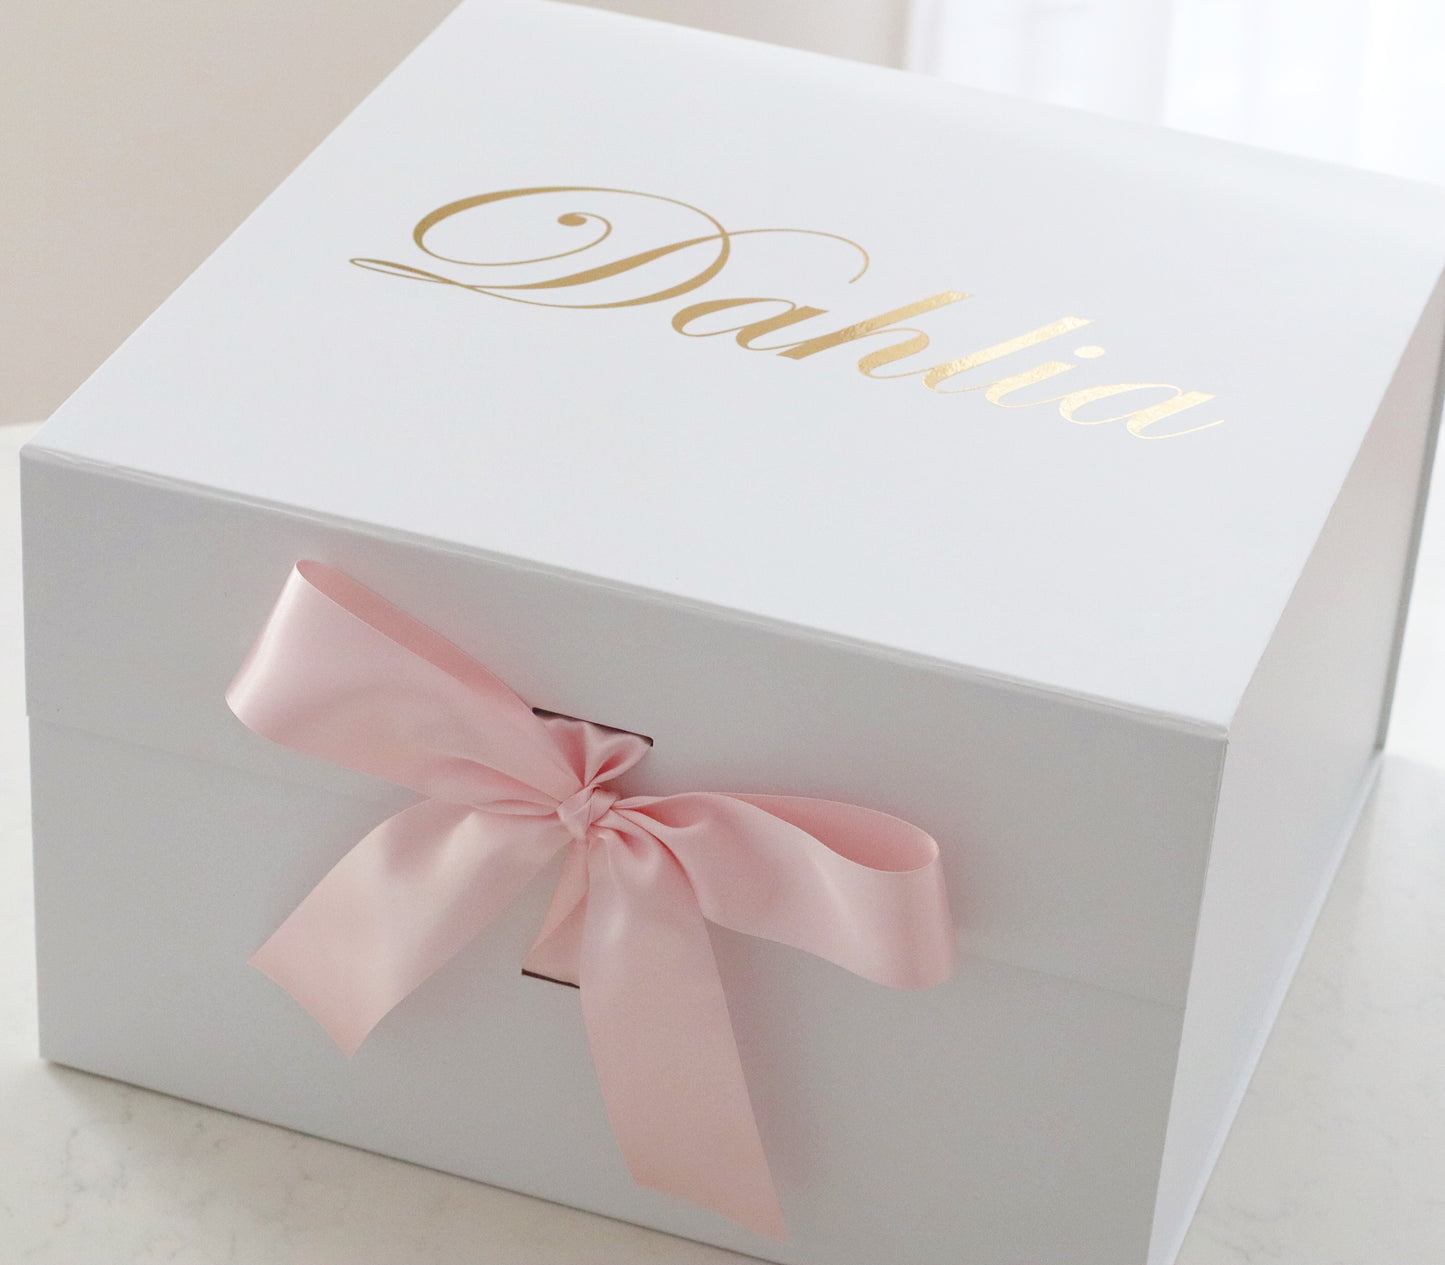 A sturdy, rigid collapsible gift box made from 2.8mm (approx.) board and covered with a bright white paper inside and a protective matte laminate coating inside and out.  Makes any gift a delightful surprise for any recipient.